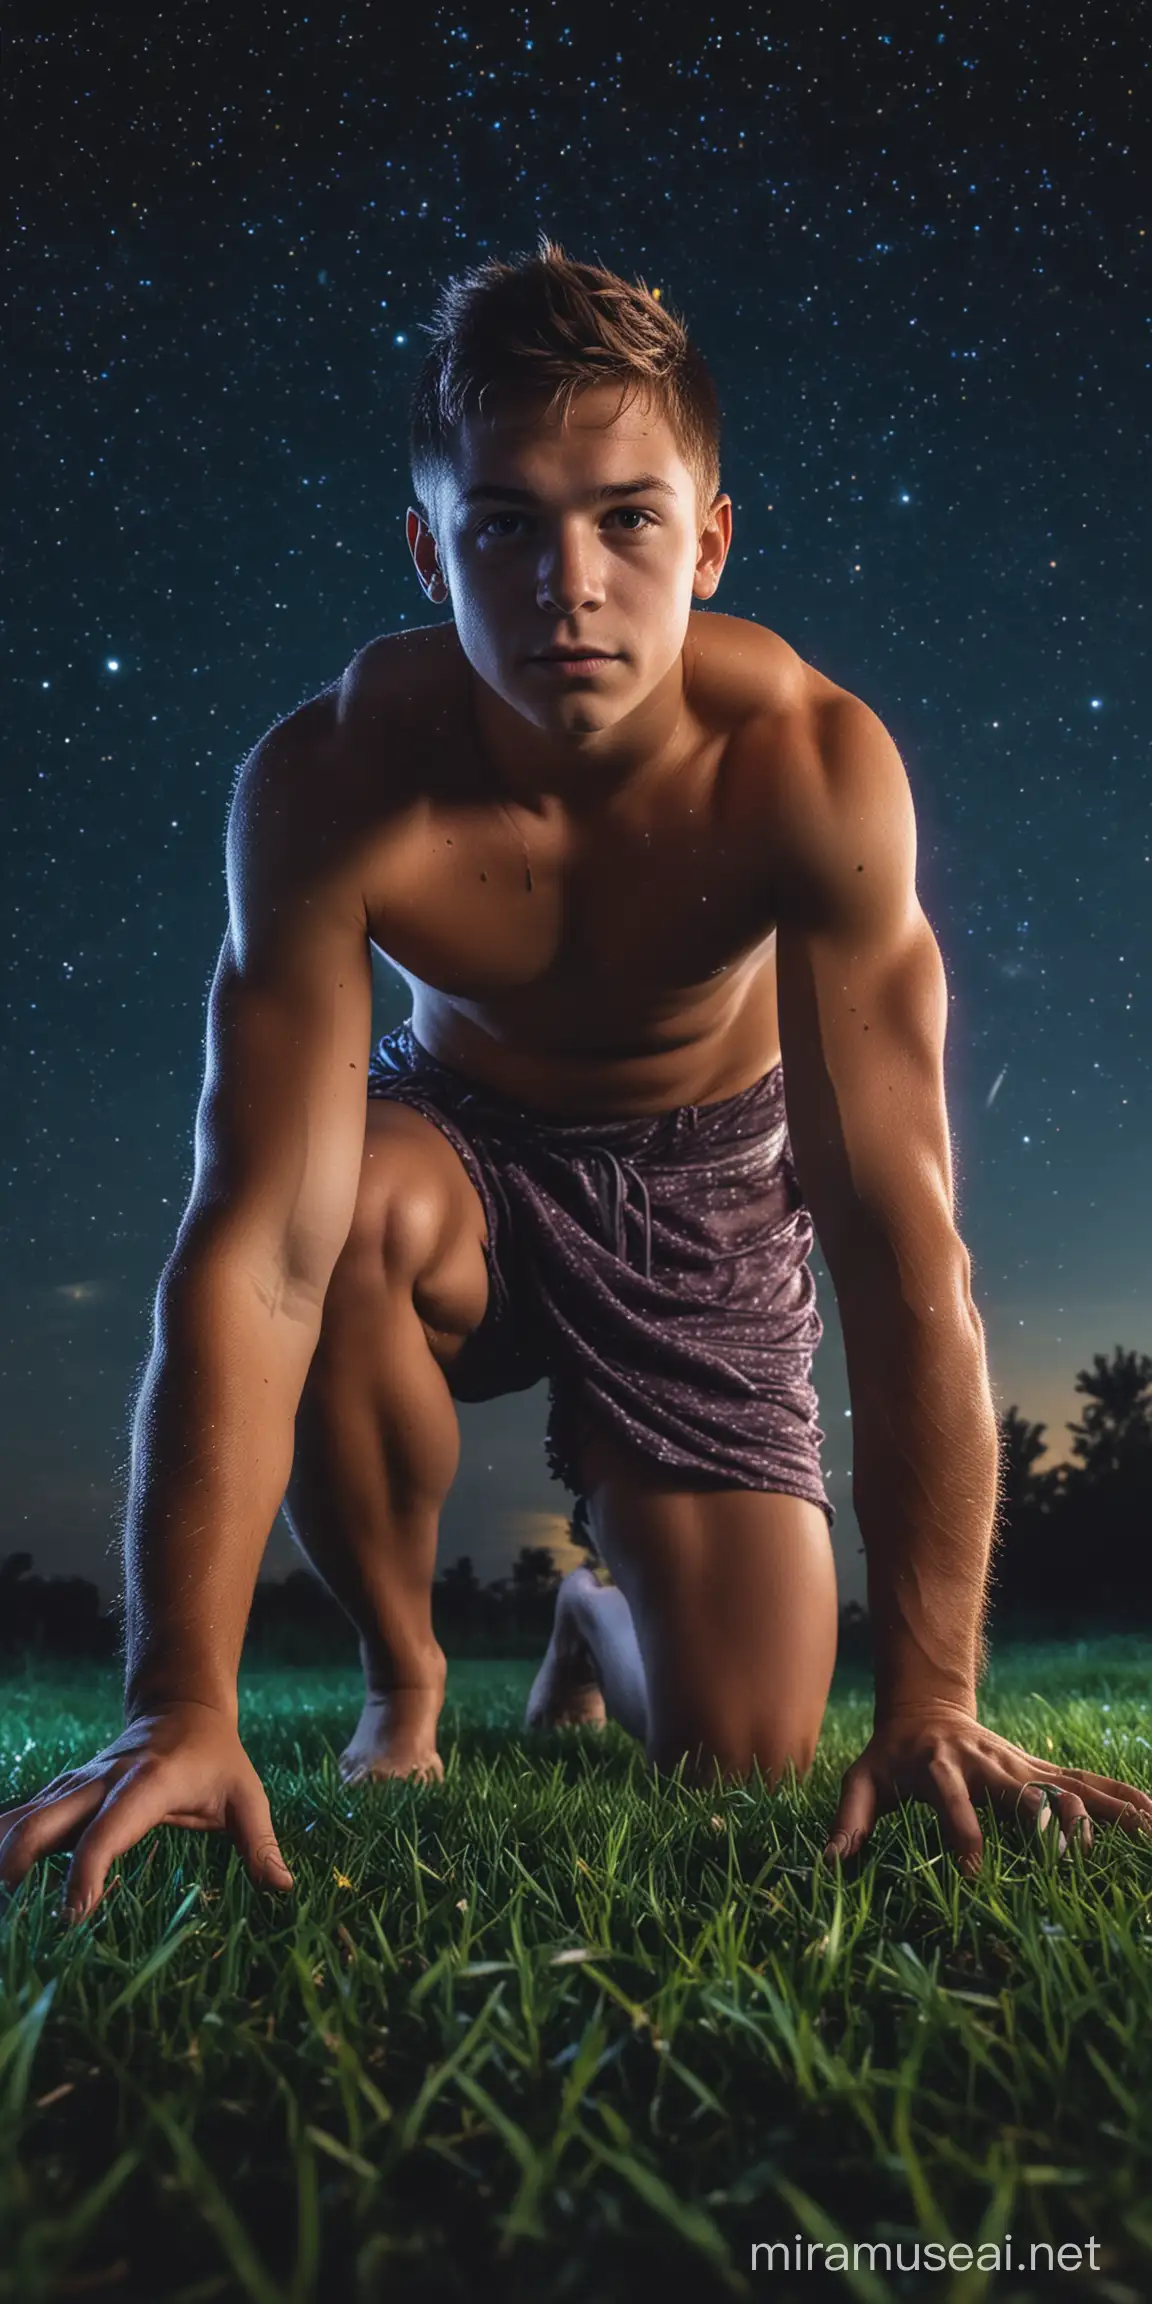 young muscular boy in loincloth, crawling on the grass, at night, under a sky full of stars, and neon colors Light effects.